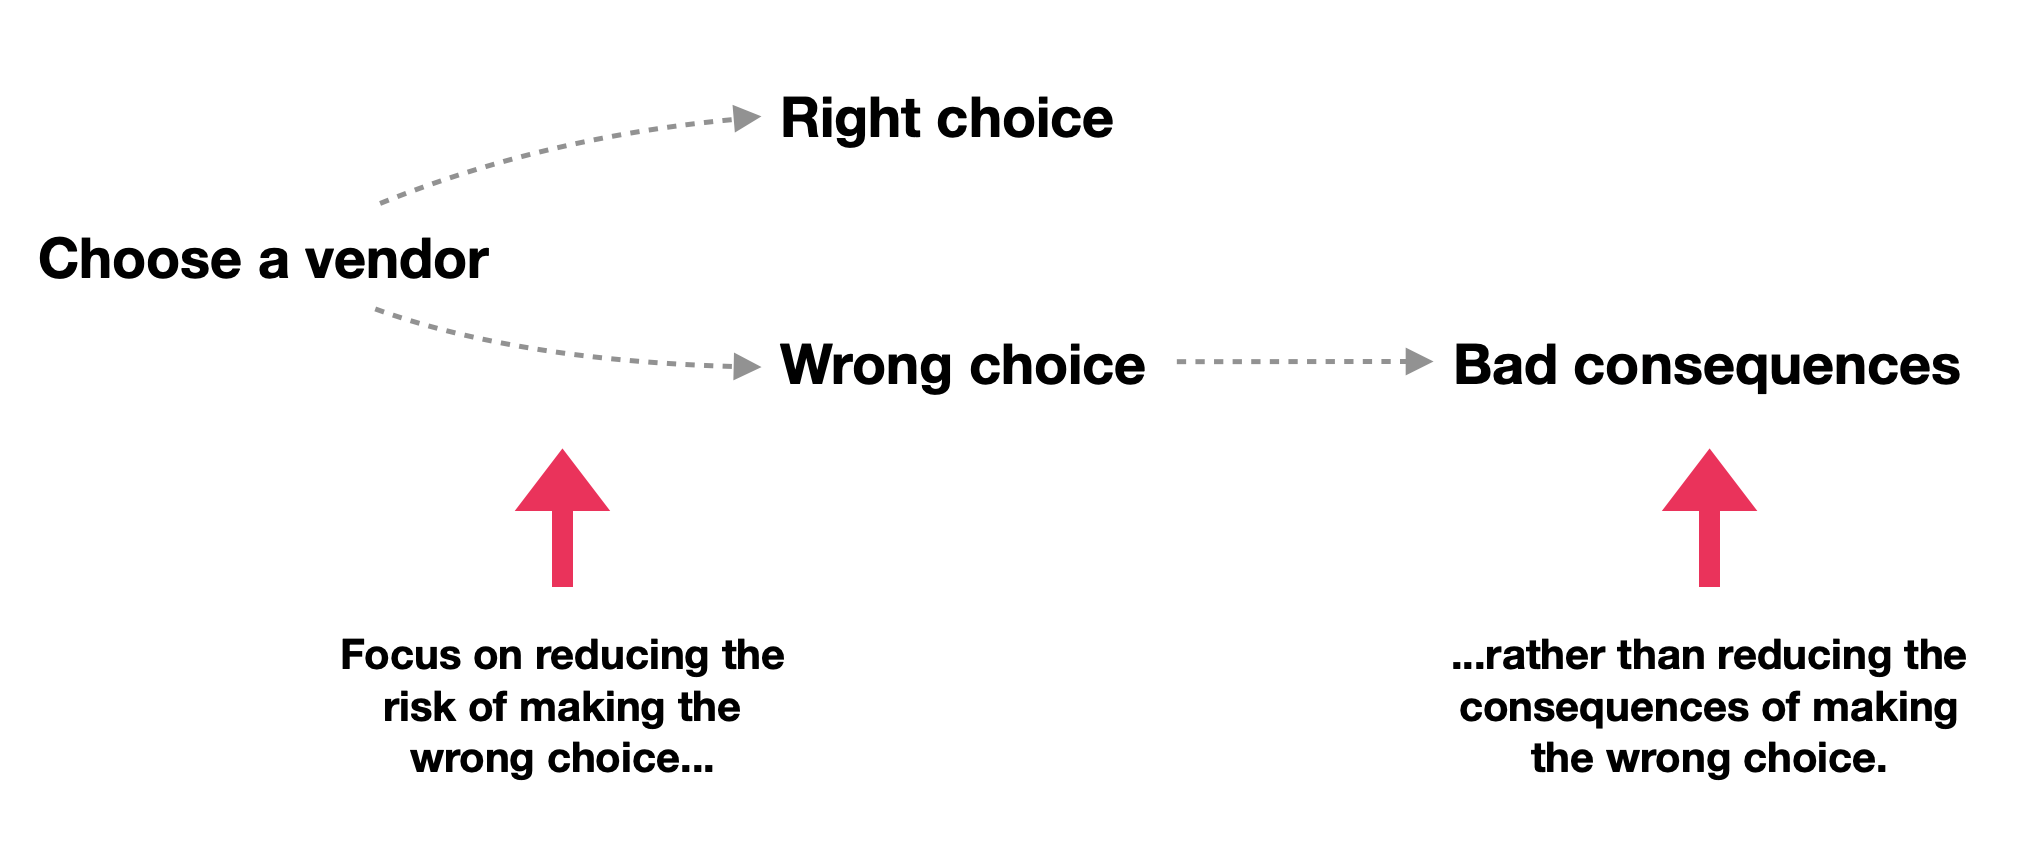 Reduce the chance of making the wrong decision rather than reducing the consequences of making the wrong decision